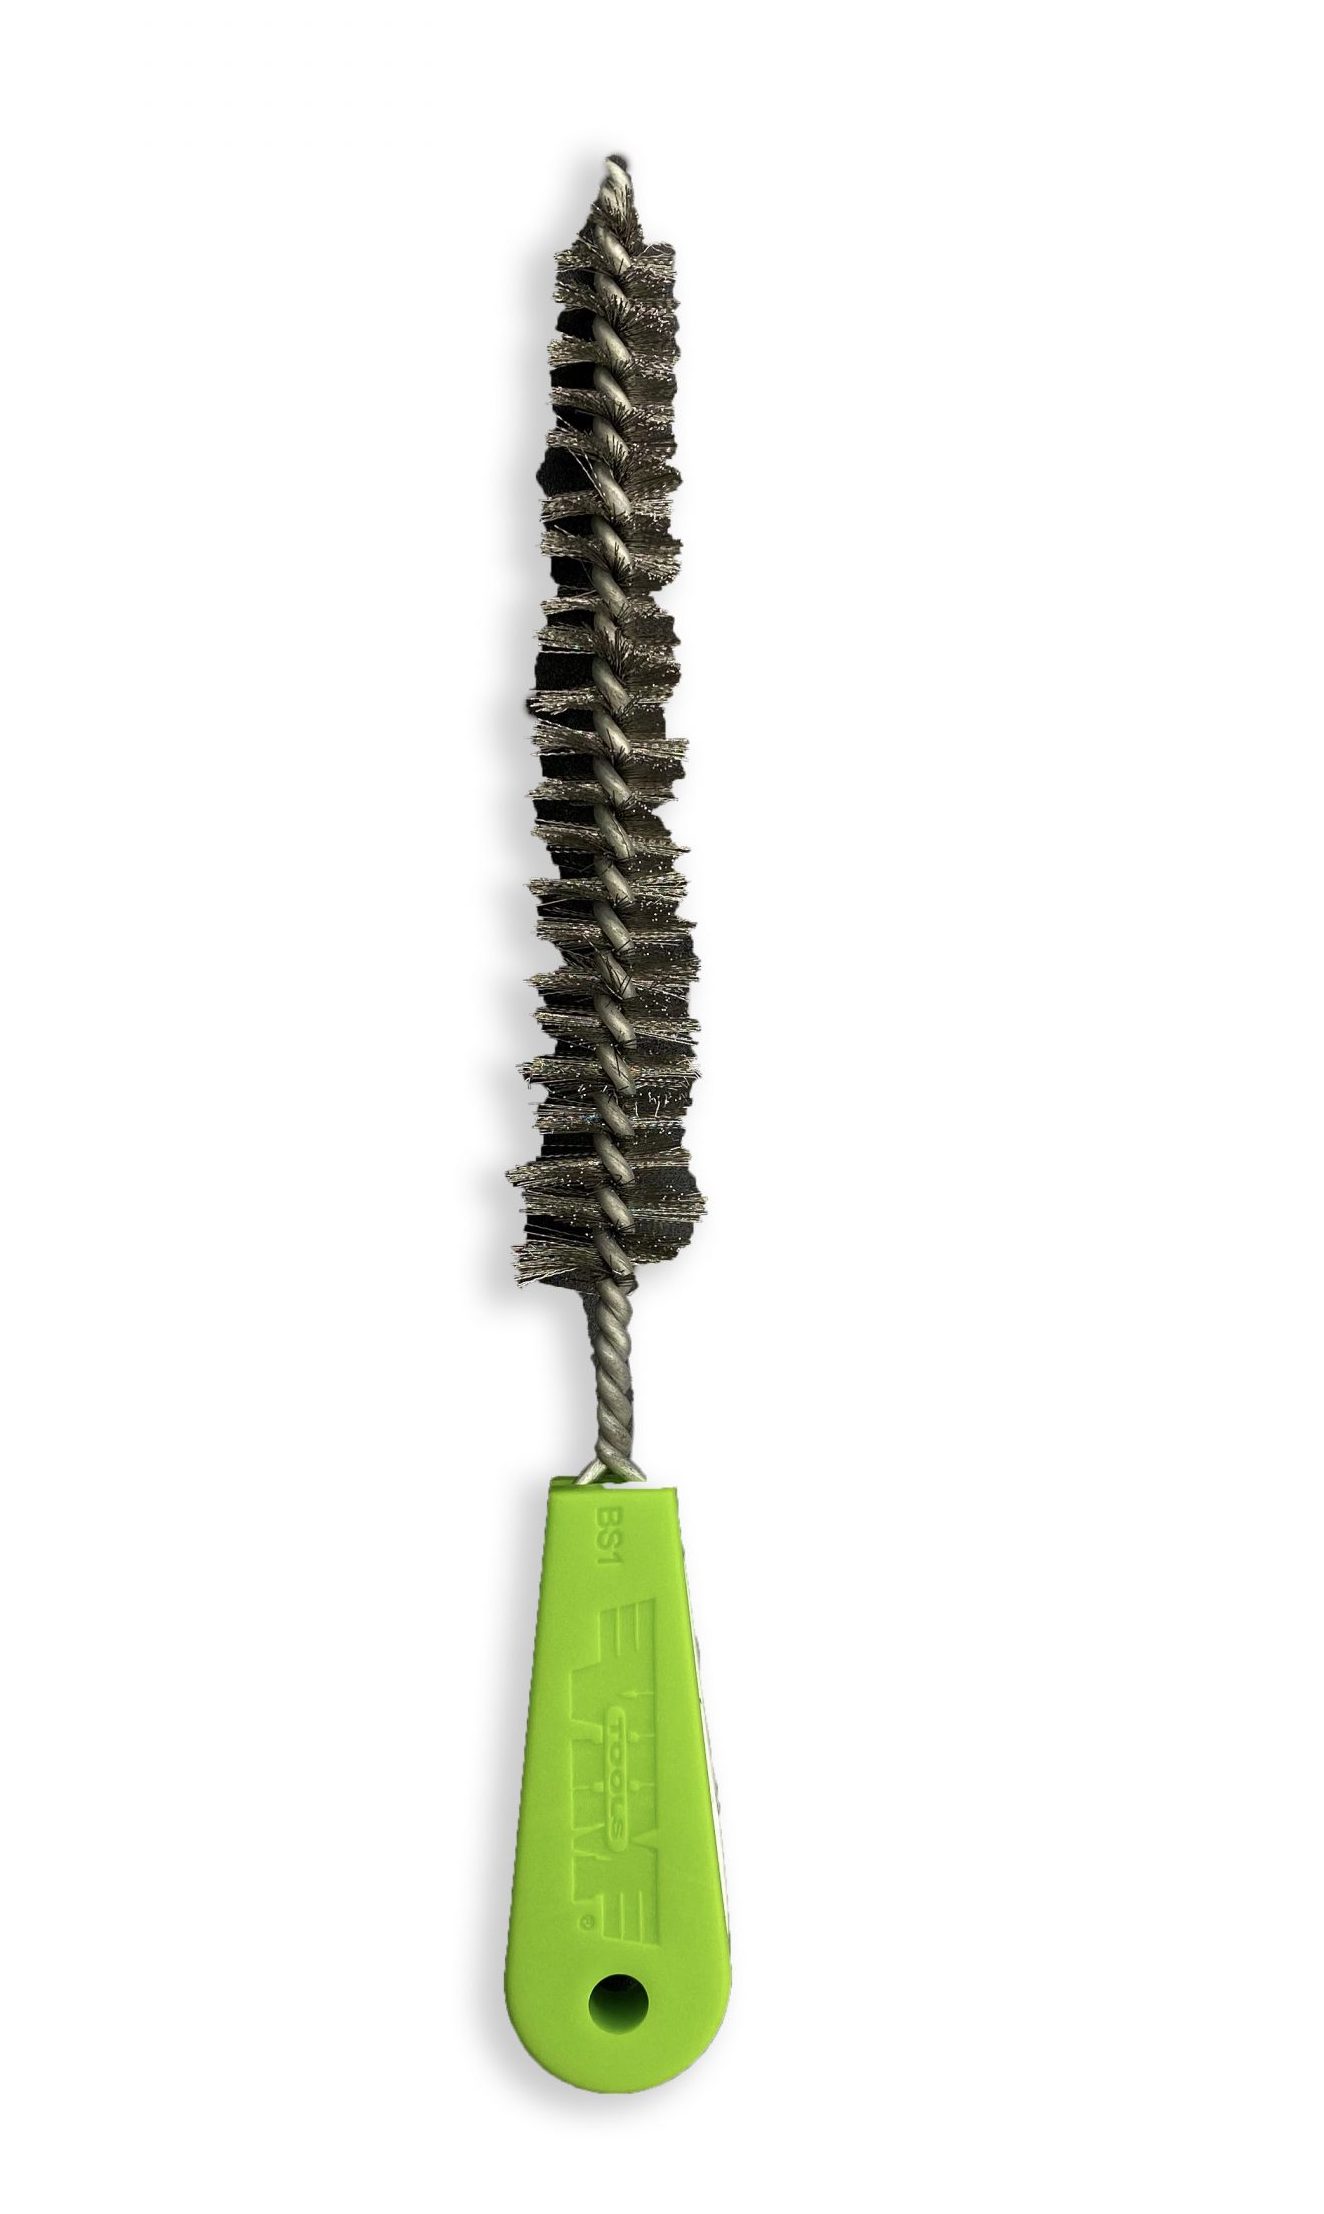 O7 Flexible Wire Cleaning Brushes